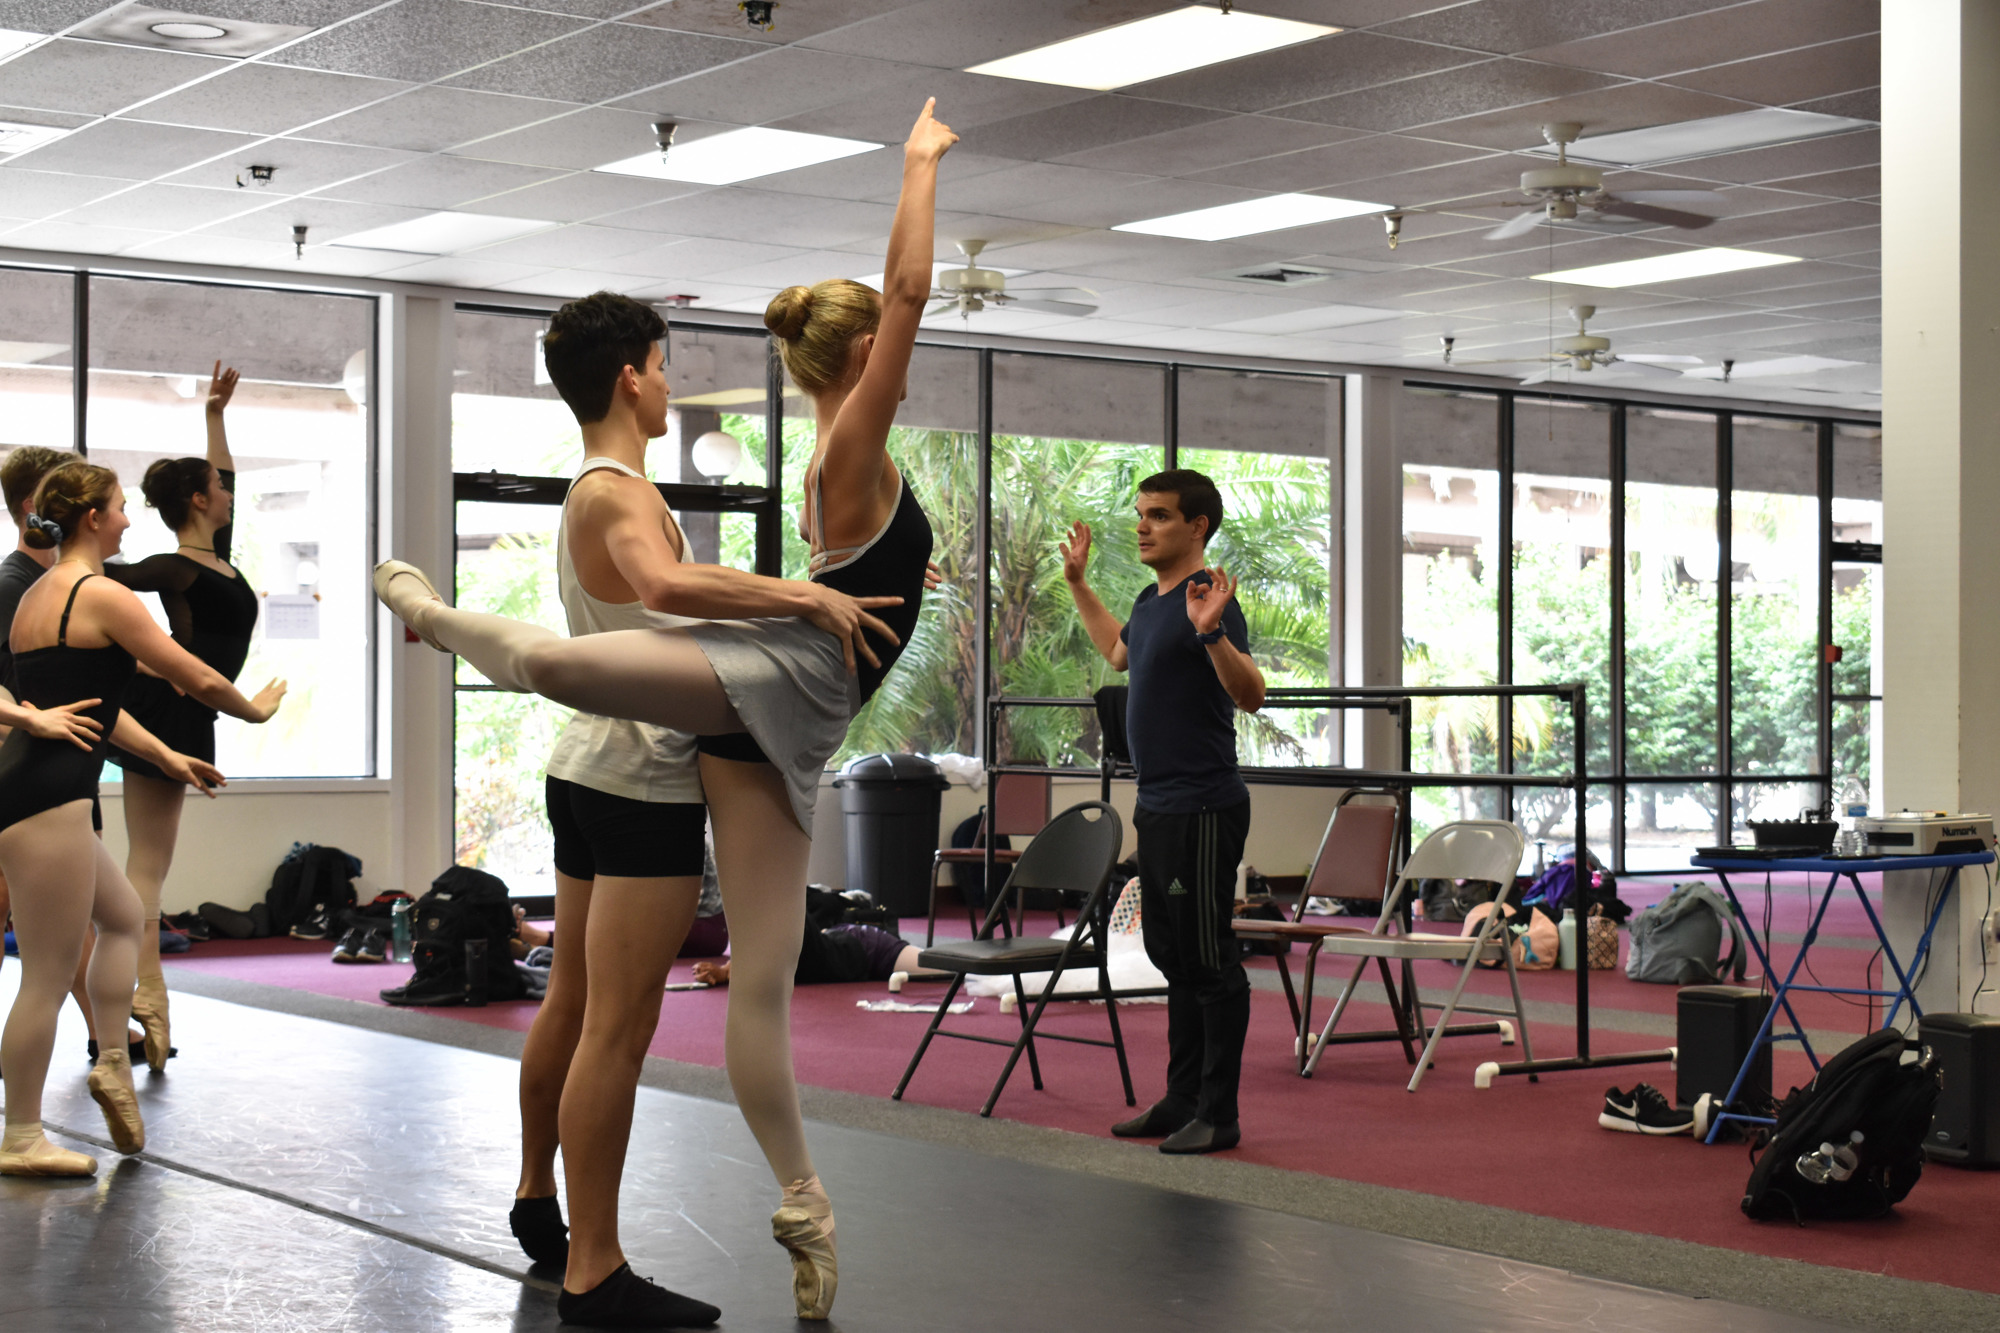 Luis Javier Fuentes Bermúdez de Castro leads a class at the SCBS intensive. In 2006, he moved to the U.S. to work as a ballet teacher at The Art of Classical Ballet School. Photo by Niki Kottmann